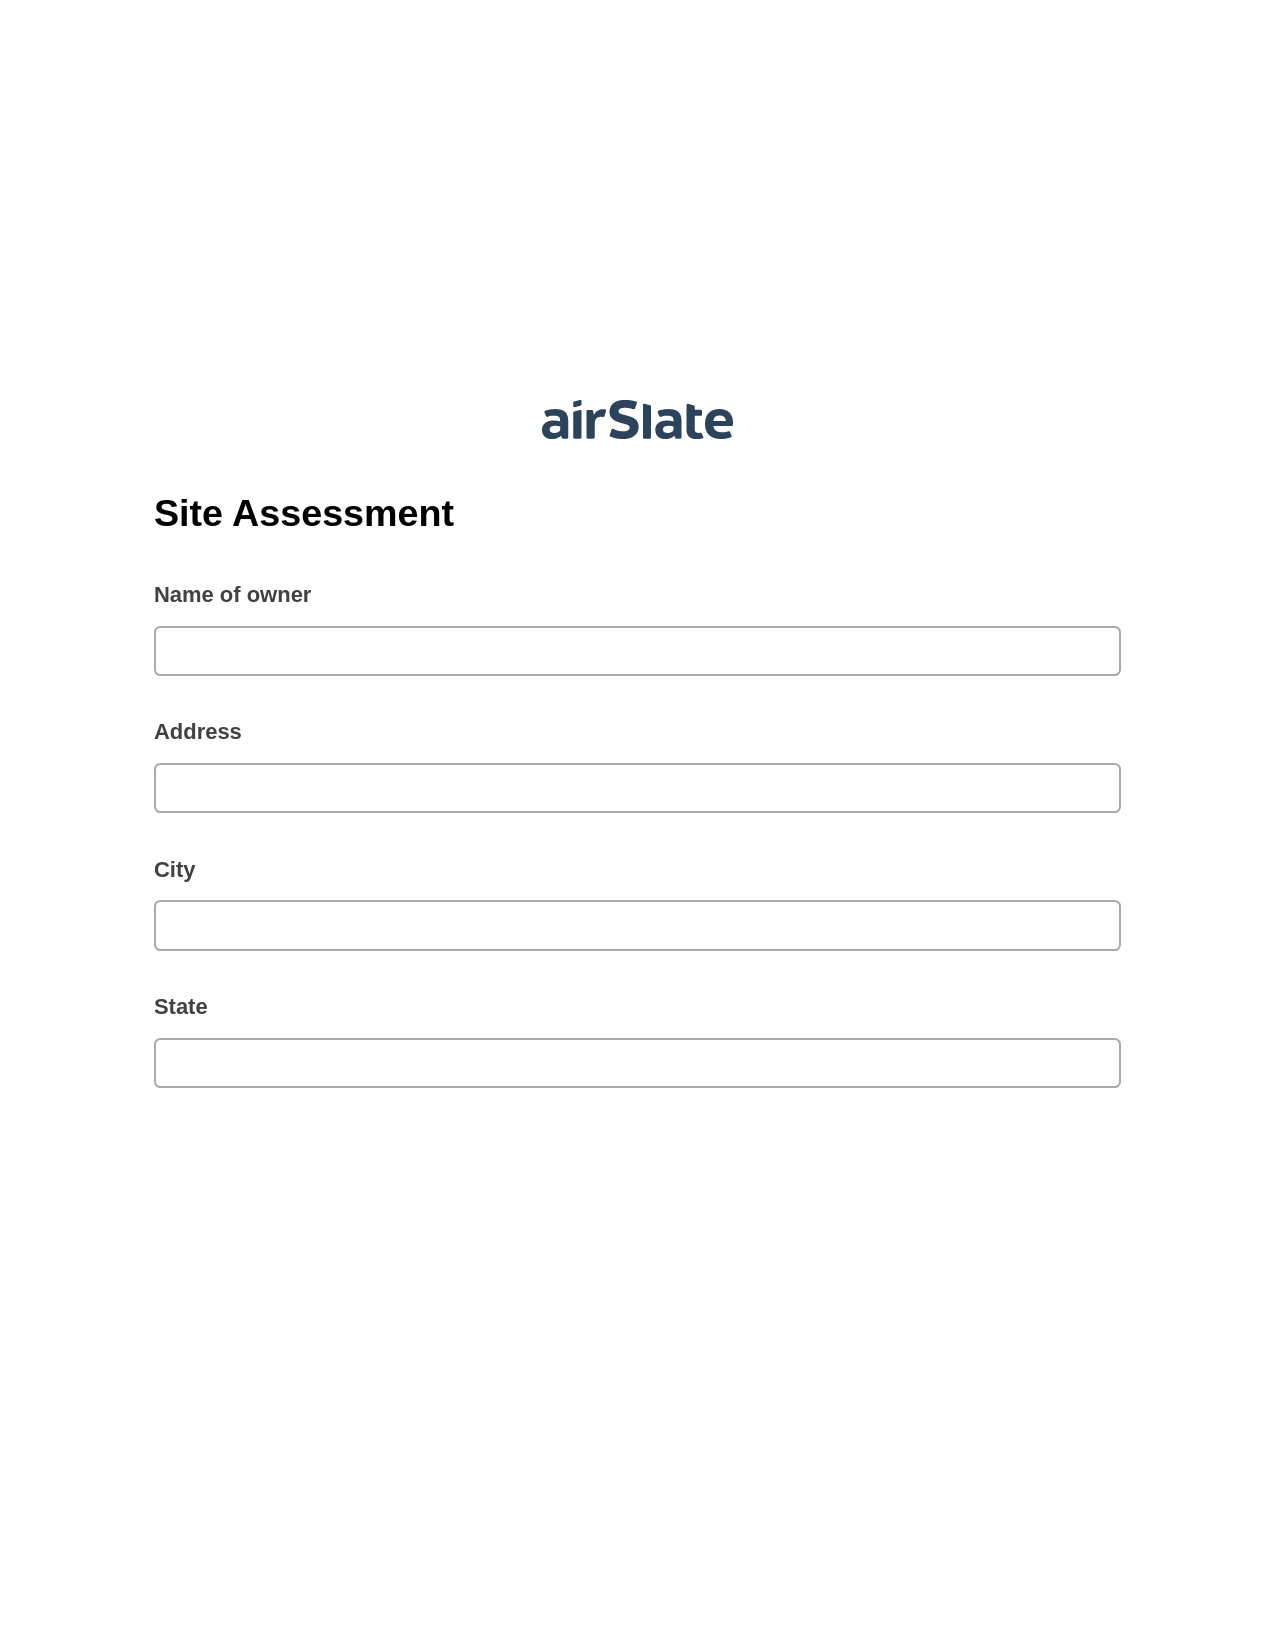 Multirole Site Assessment Pre-fill from another Slate Bot, Google Cloud Print Bot, Archive to SharePoint Folder Bot